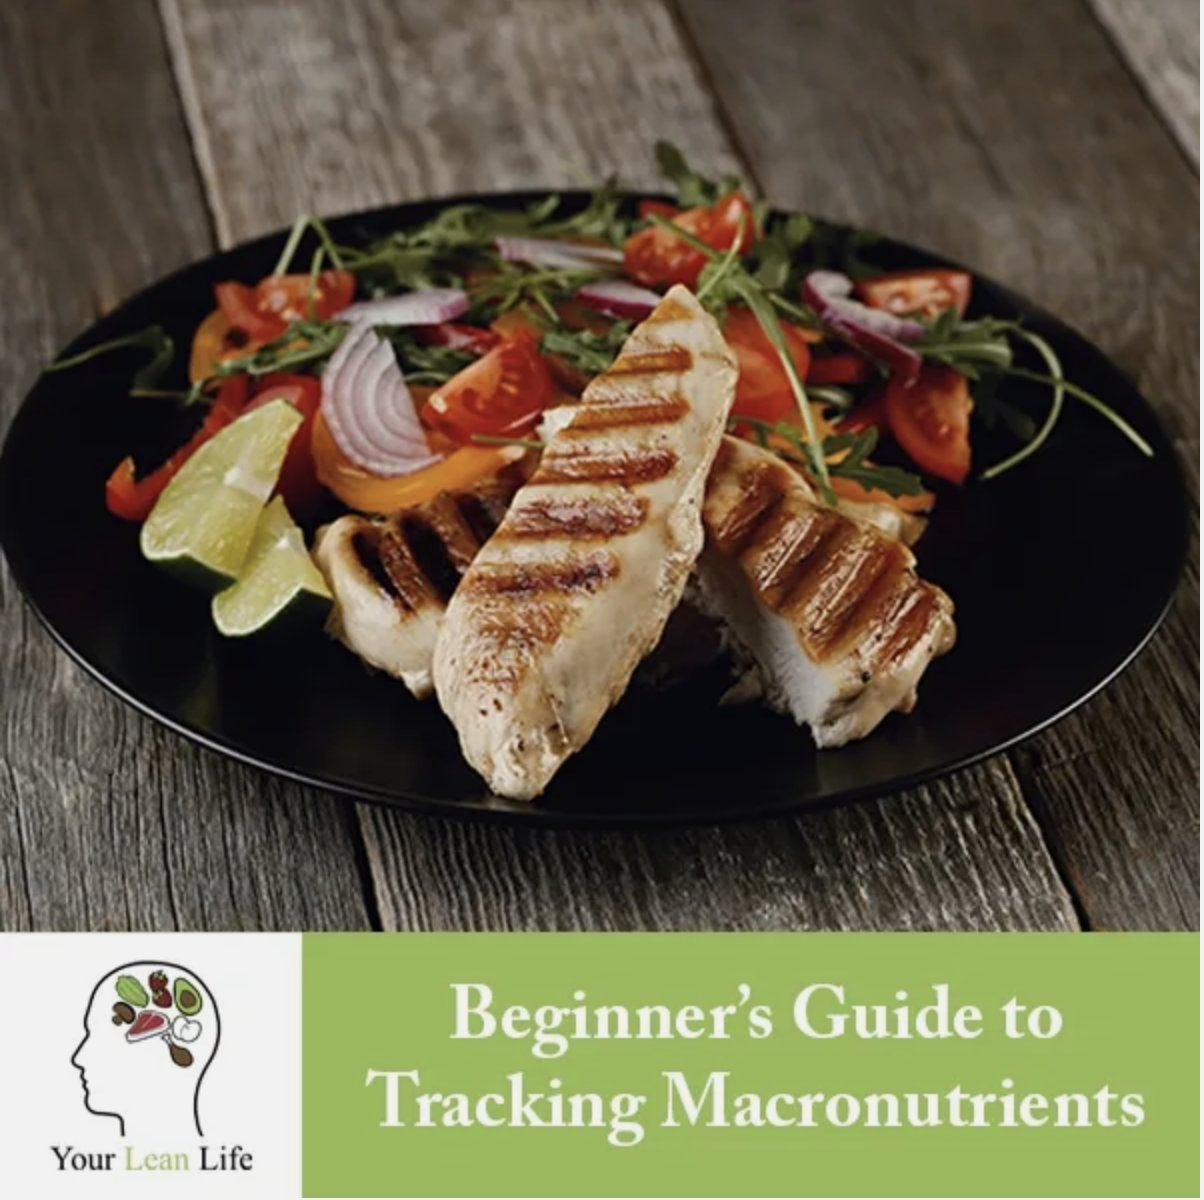 Beginner’s Guide to Tracking Macronutrients